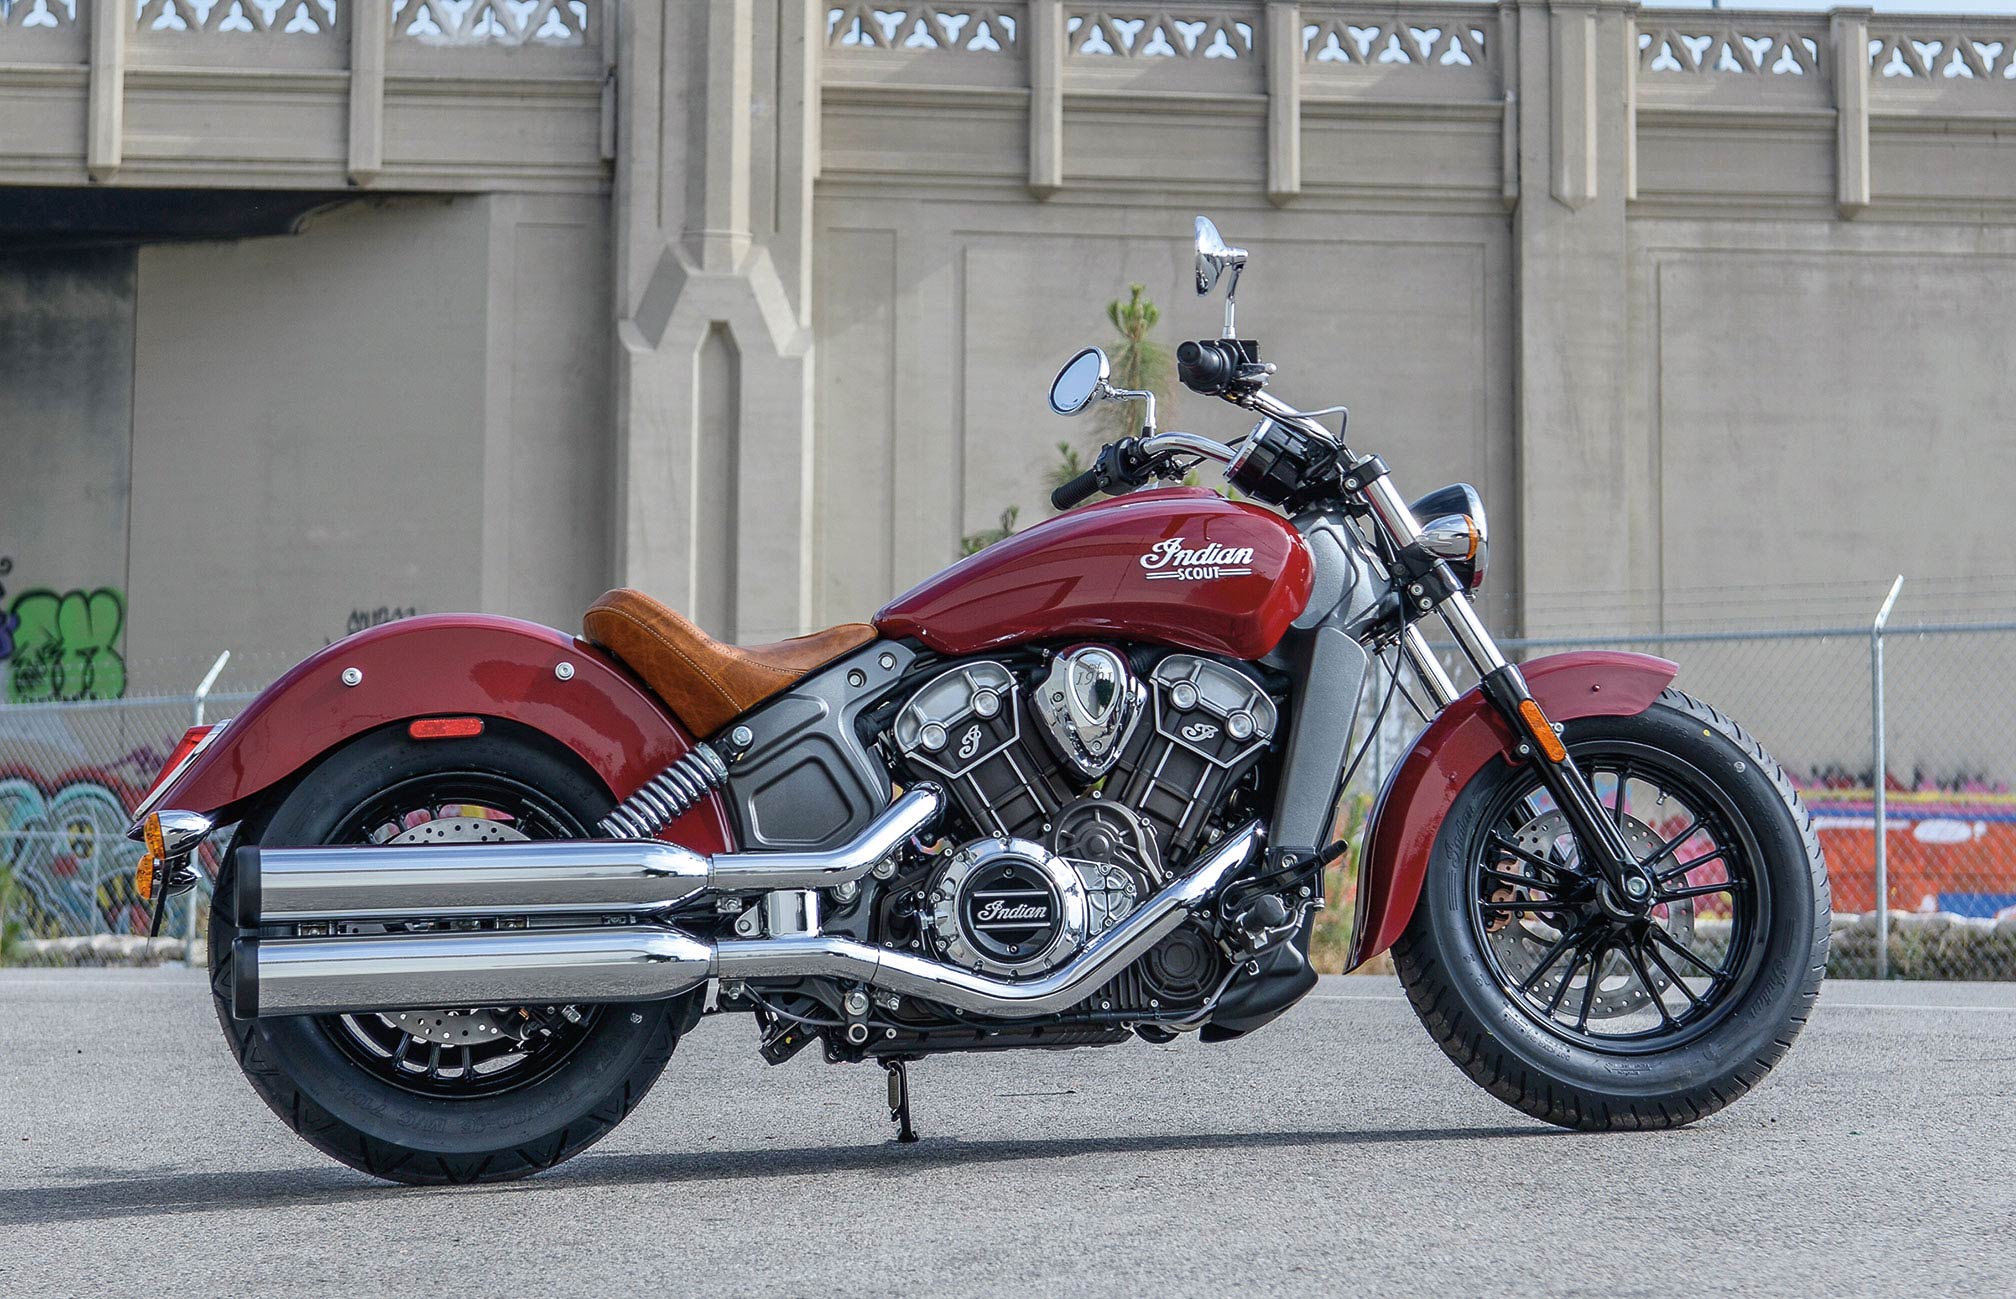 2016 Indian Scout Review